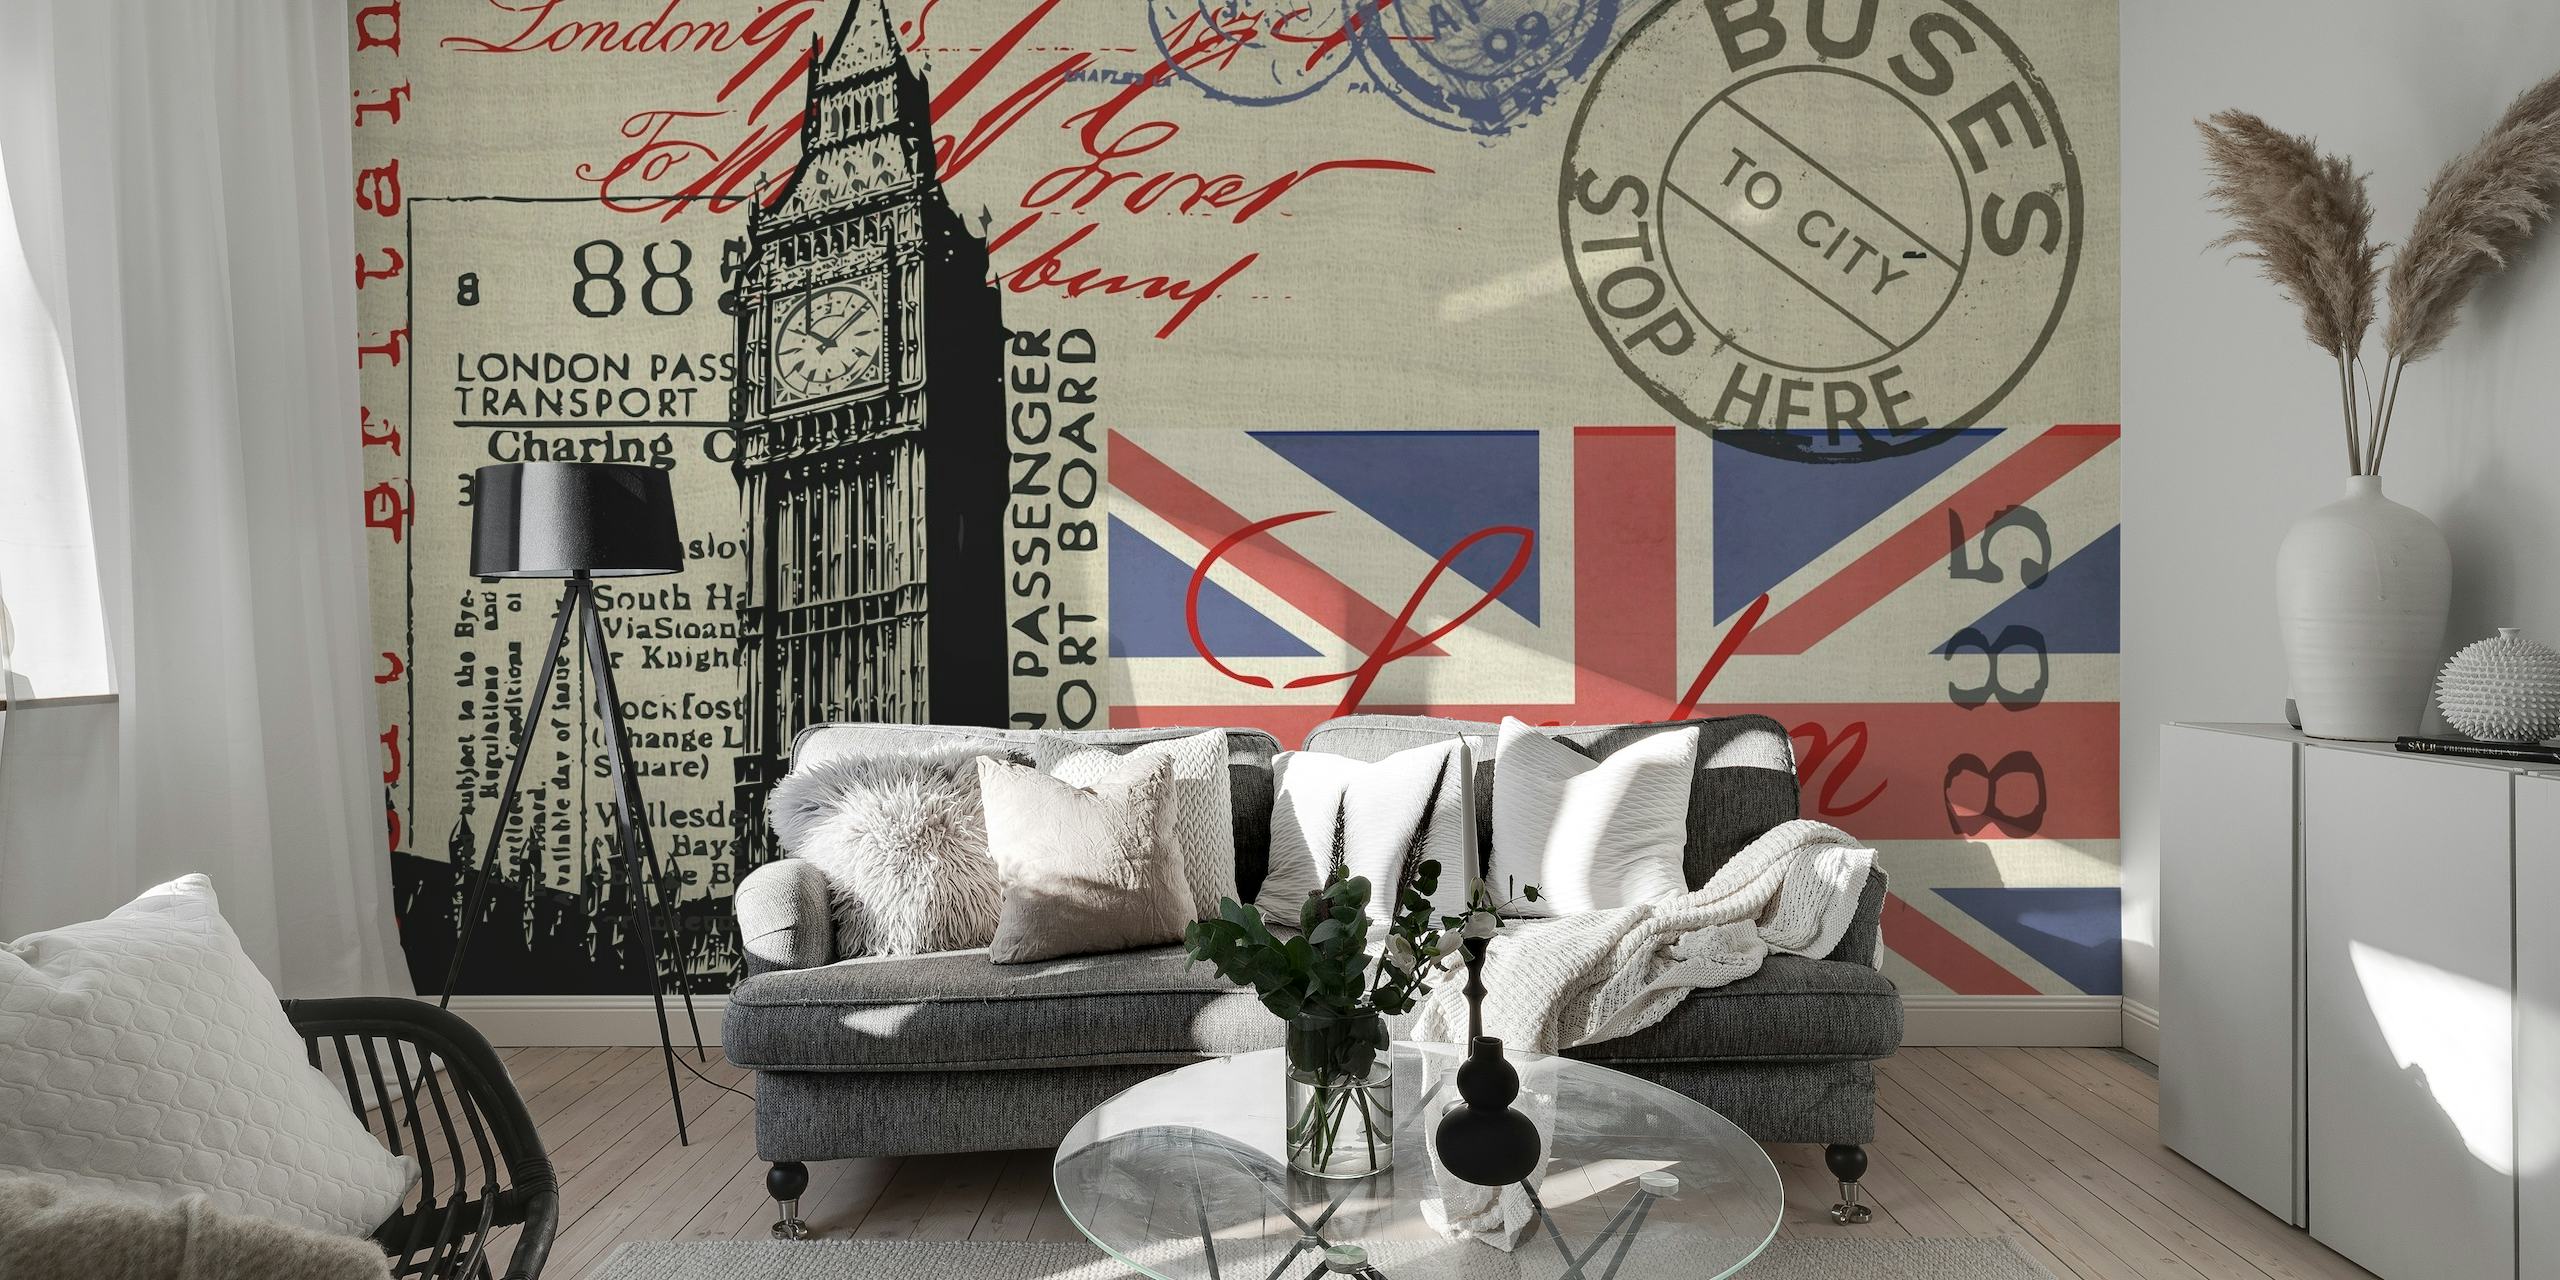 Vintage style wall mural of London landmarks with Big Ben, red buses, and Union Jack flag